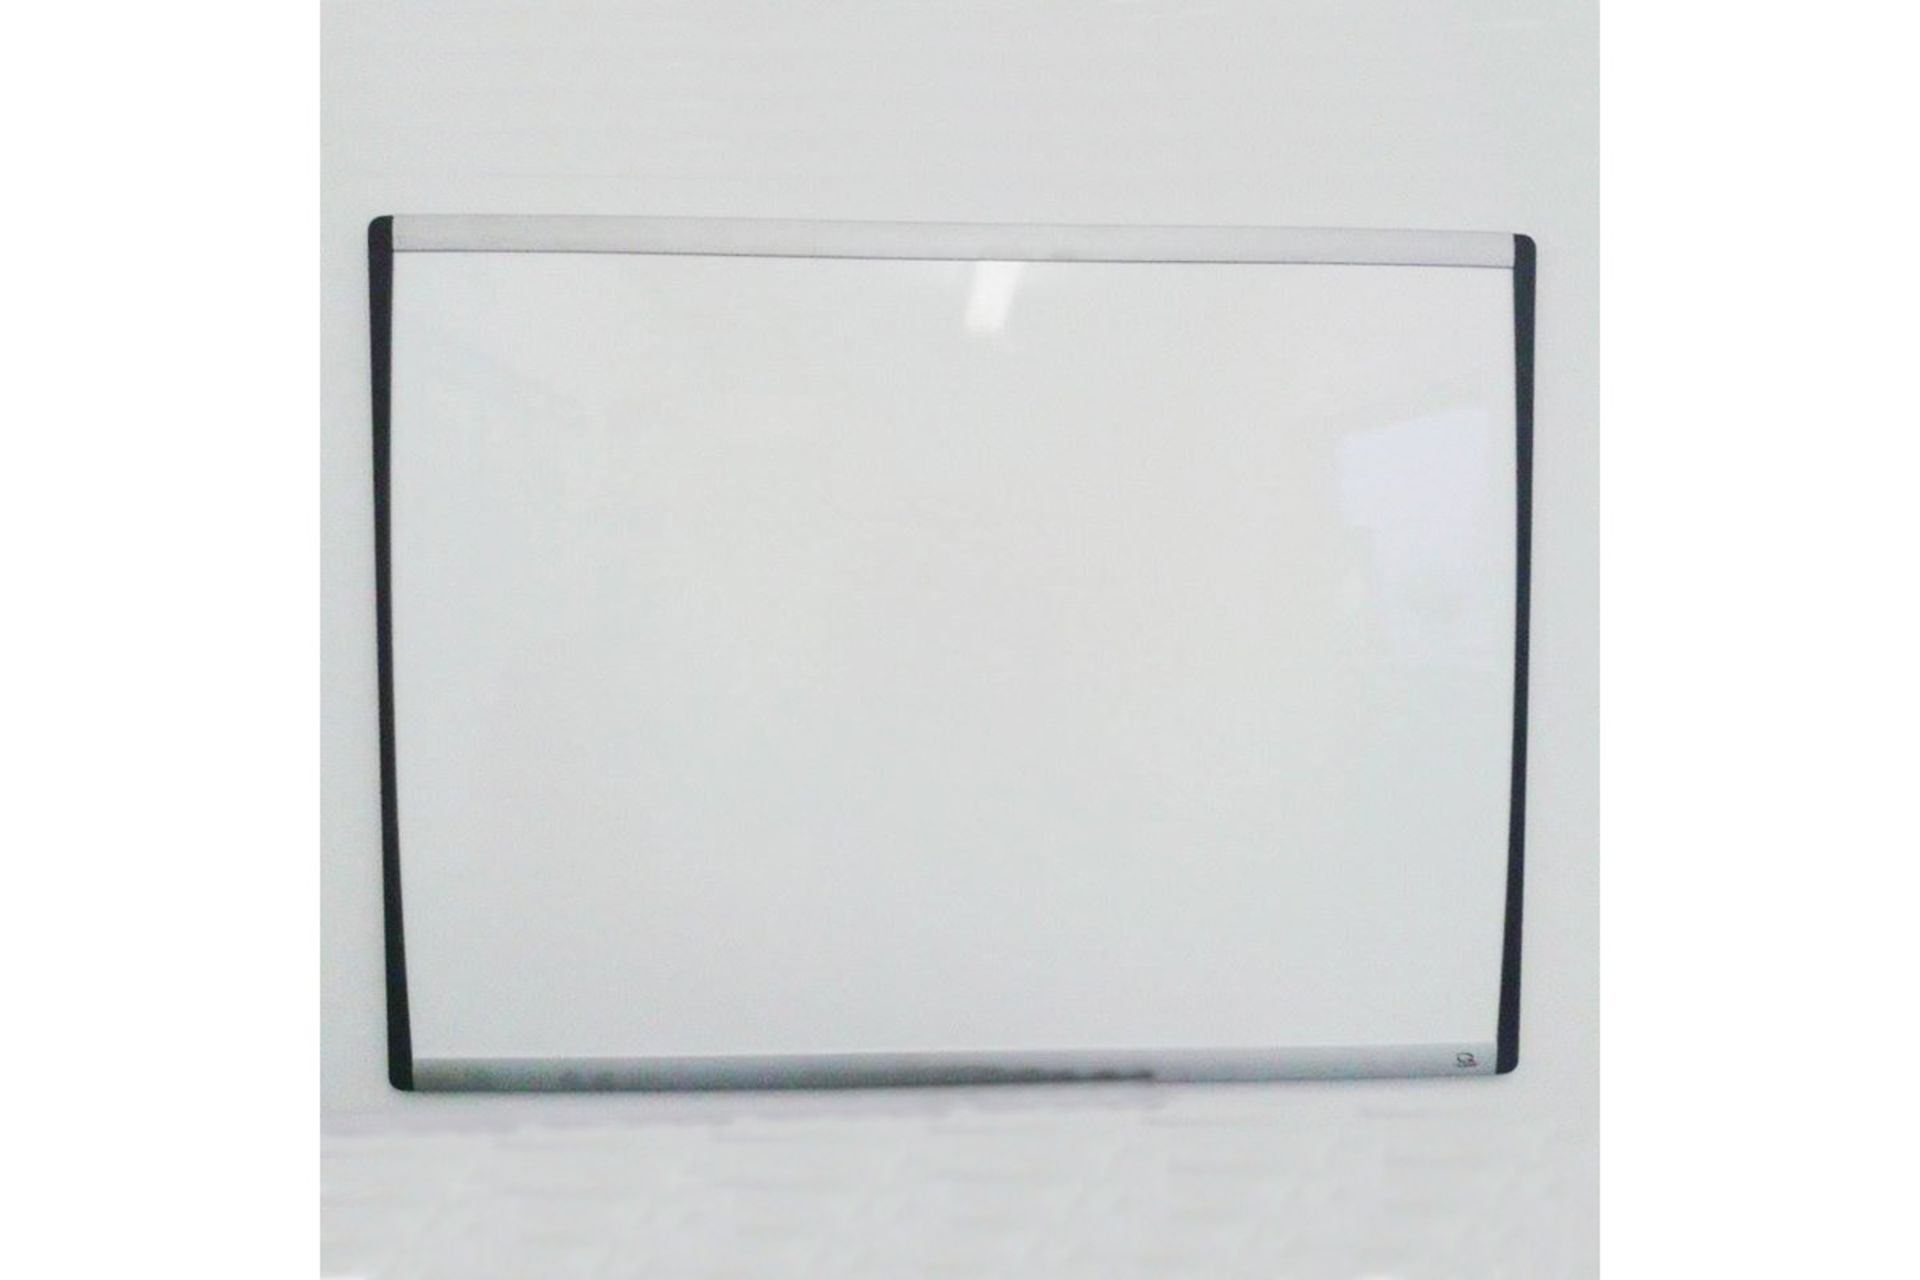 V Brand New Magnetic Whiteboard (40 in a pack )(size: 30CM x 24CM) Frame made from high quality